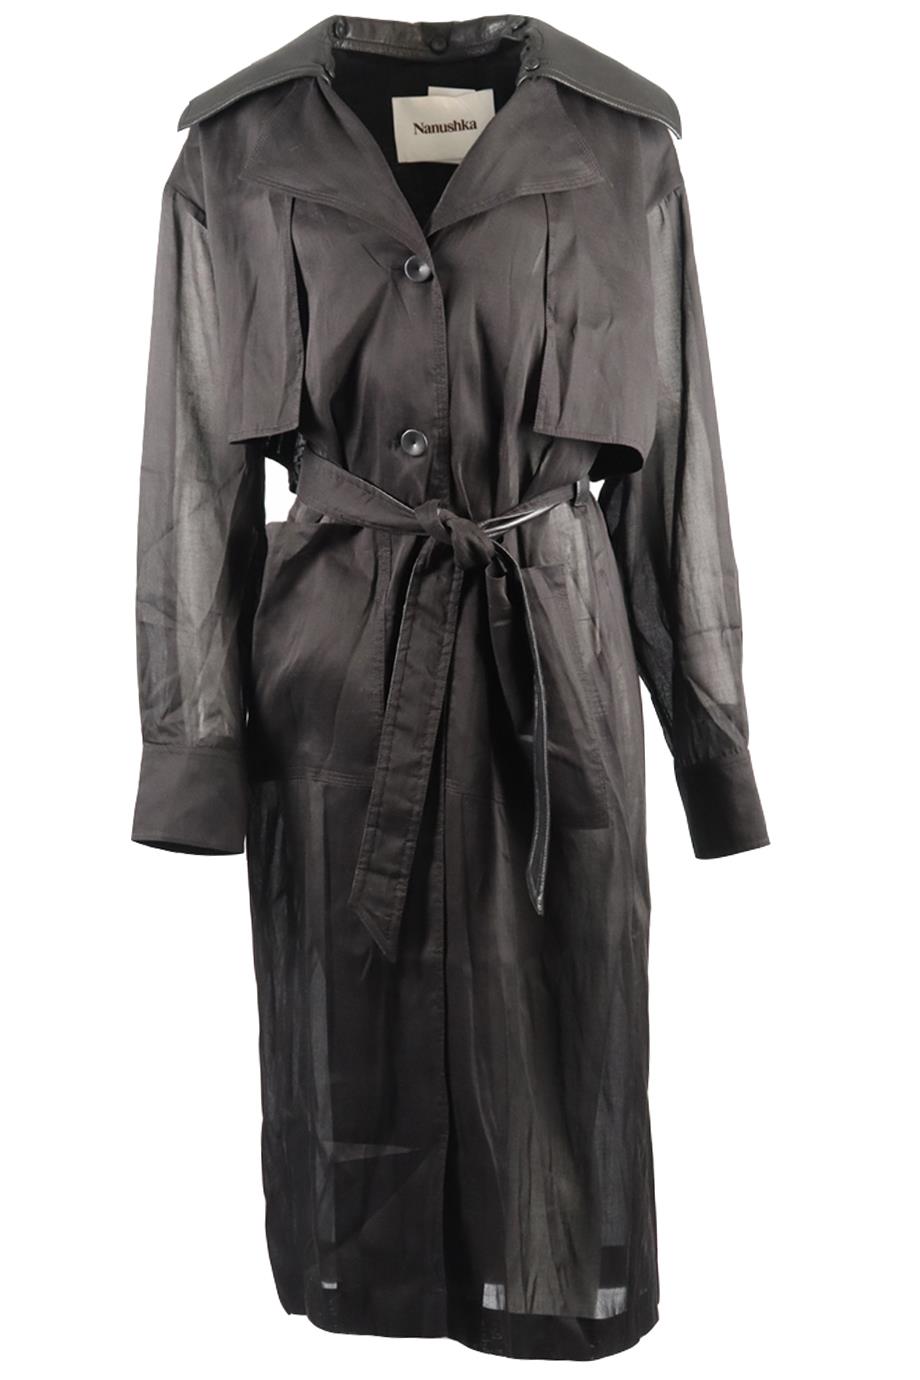 NANUSHKA BELTED LEATHER AND COTTON BLEND TRENCH COAT SMALL